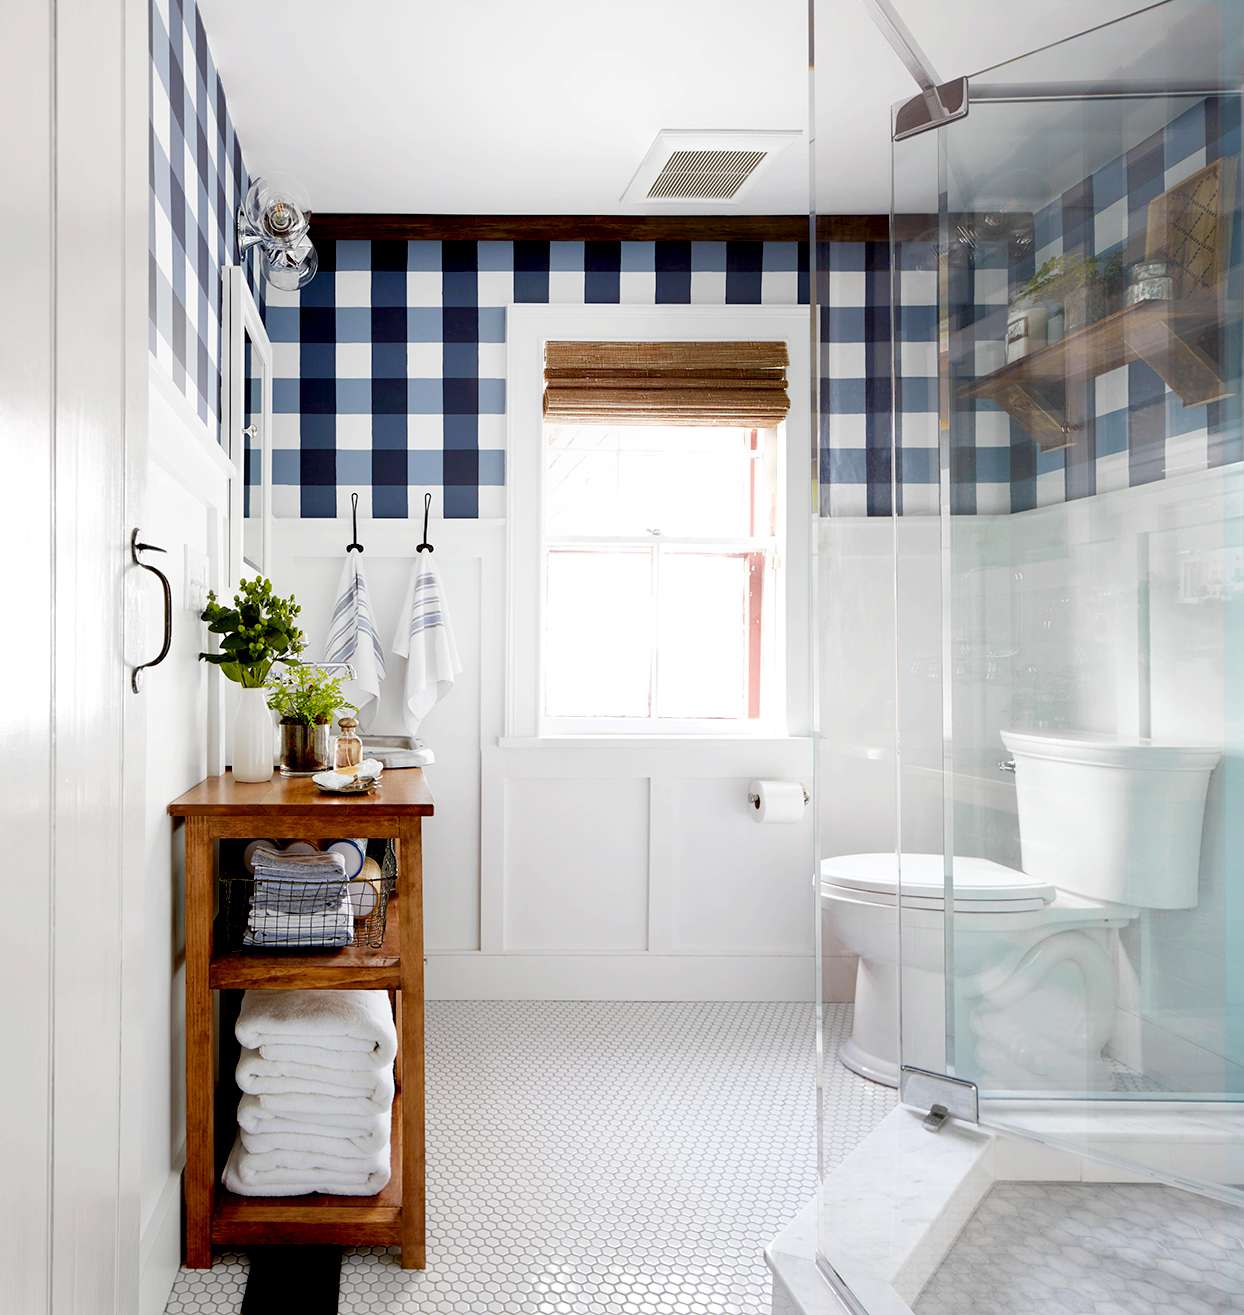 Bathroom with blue and white plaid wallpaper